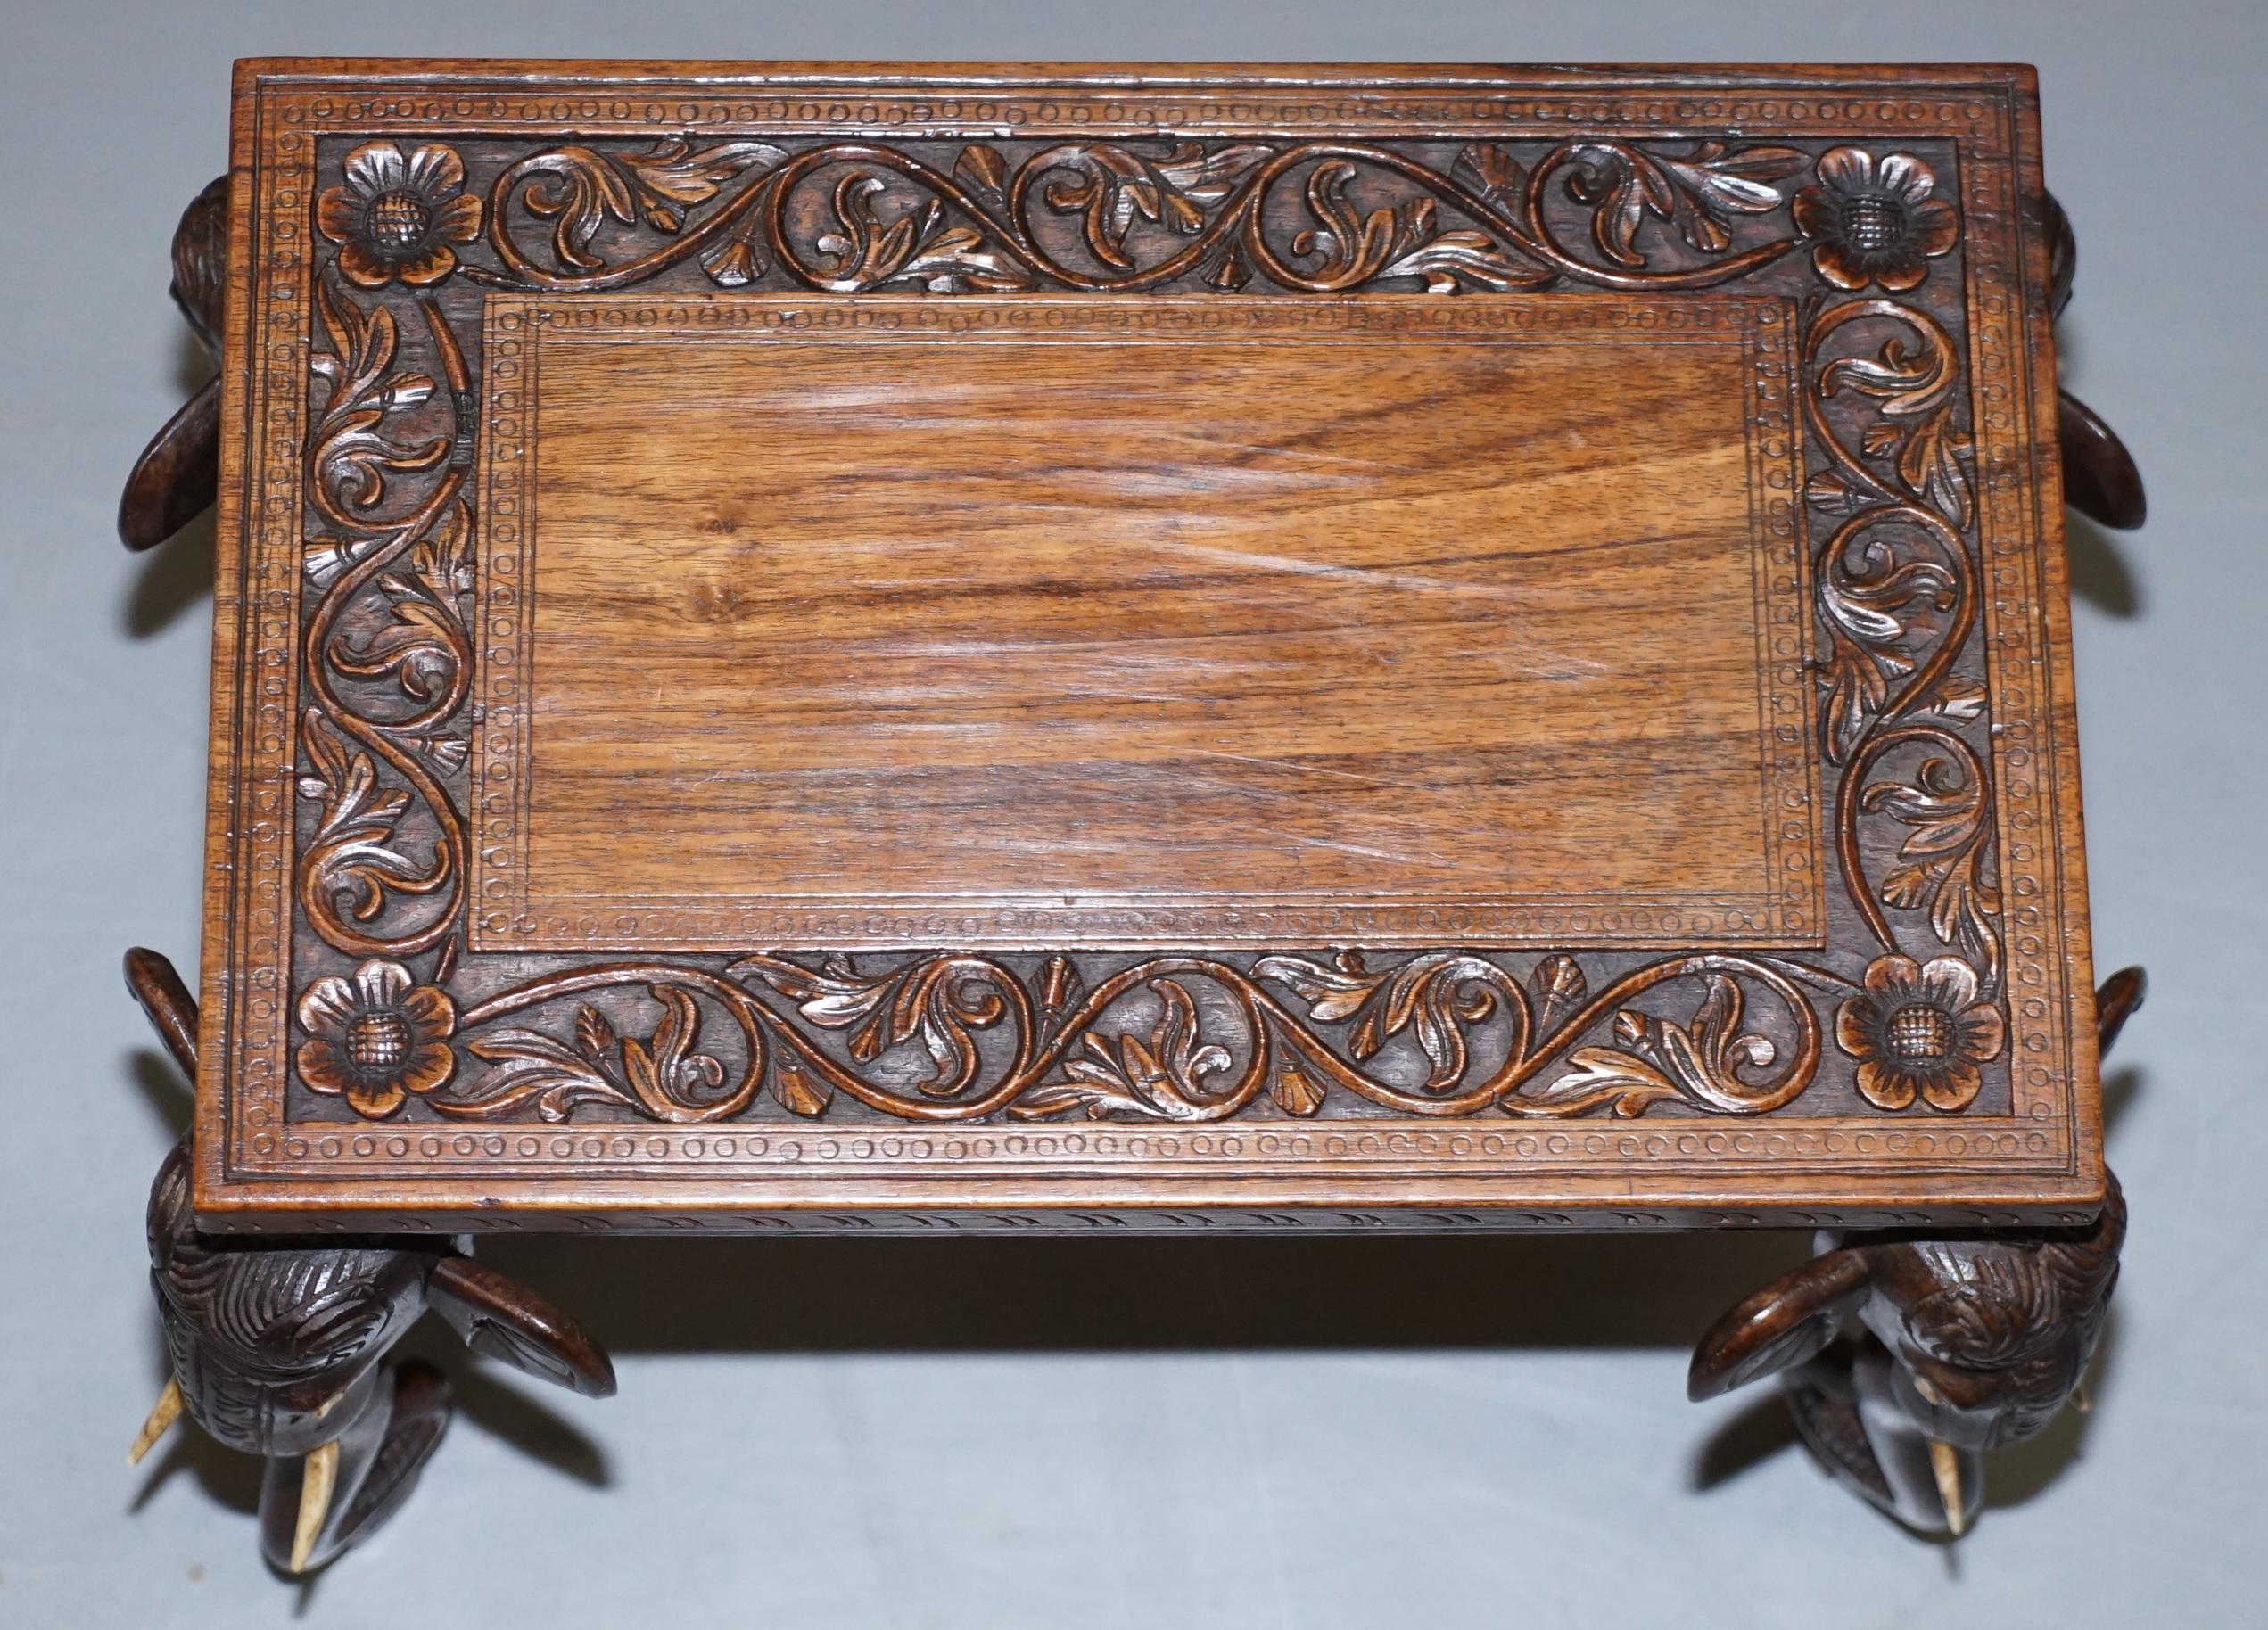 Early 20th Century Stunning Small circa 1900 Anglo-Indian Elephant Hand Carved Hardwood Side Table